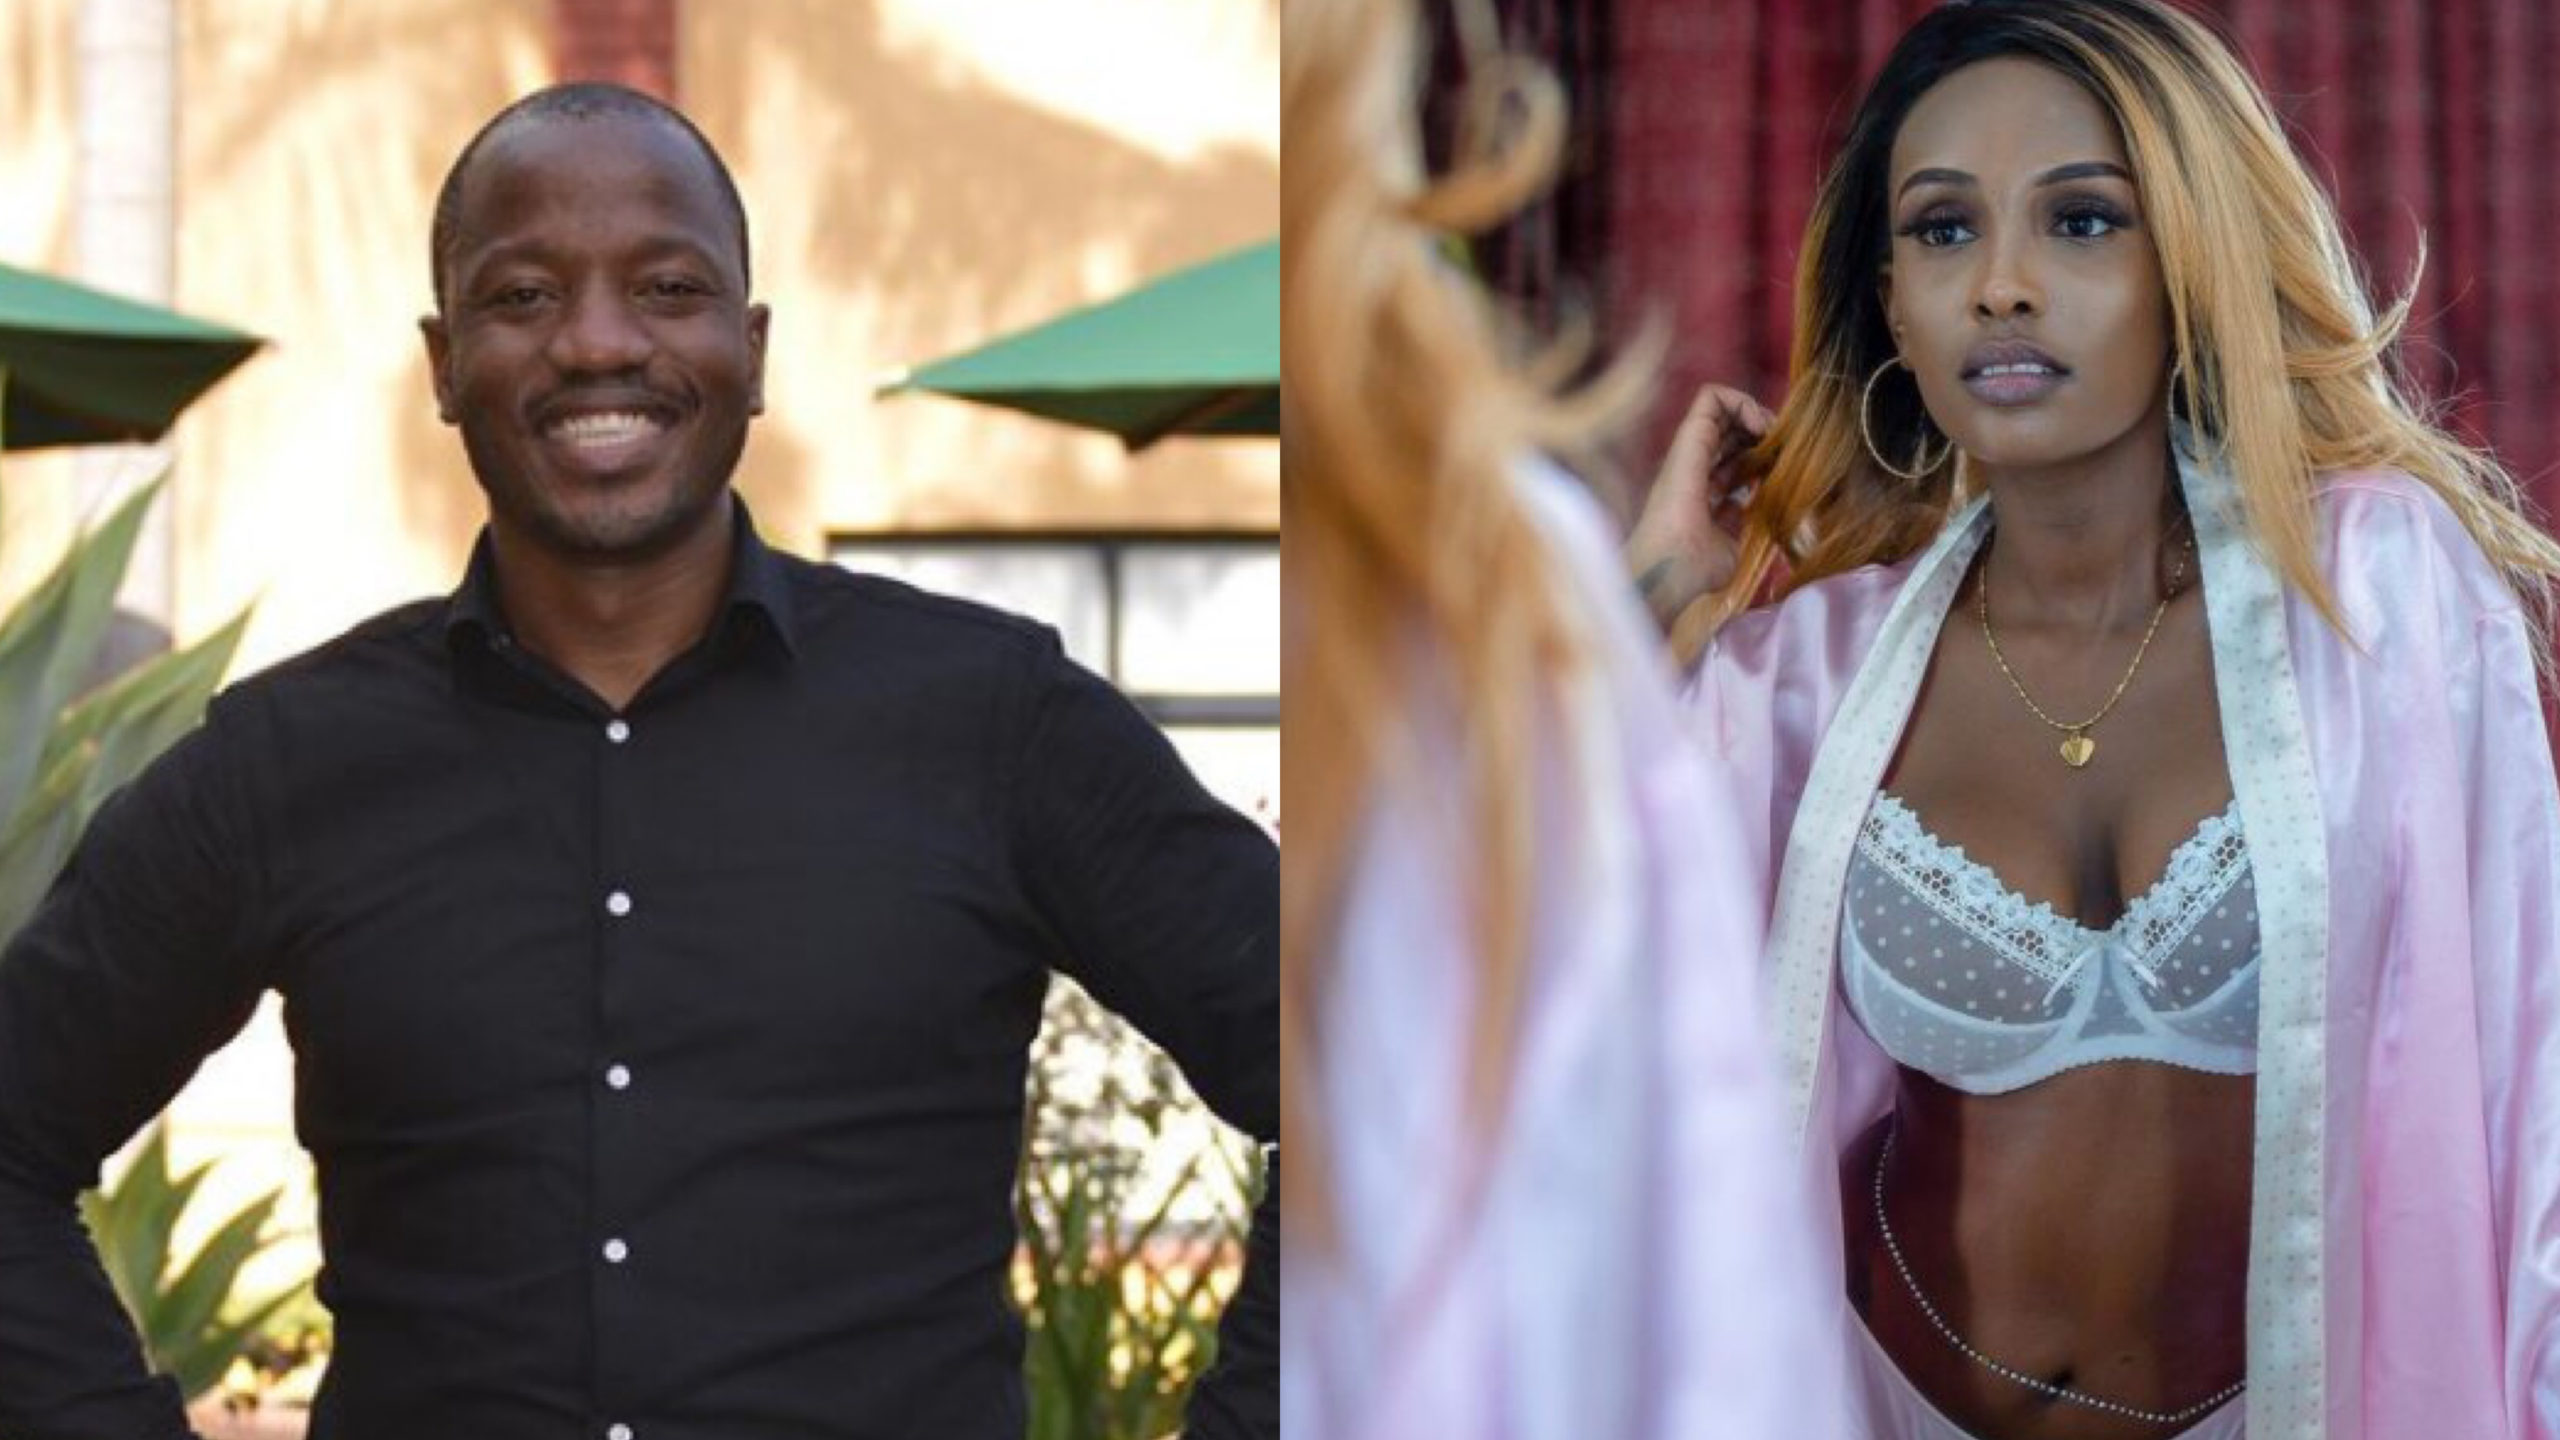 Priceless: Tony Kwalanda’s reaction after Switch TV’s Joyce Maina publicly calls off engagement (Video)